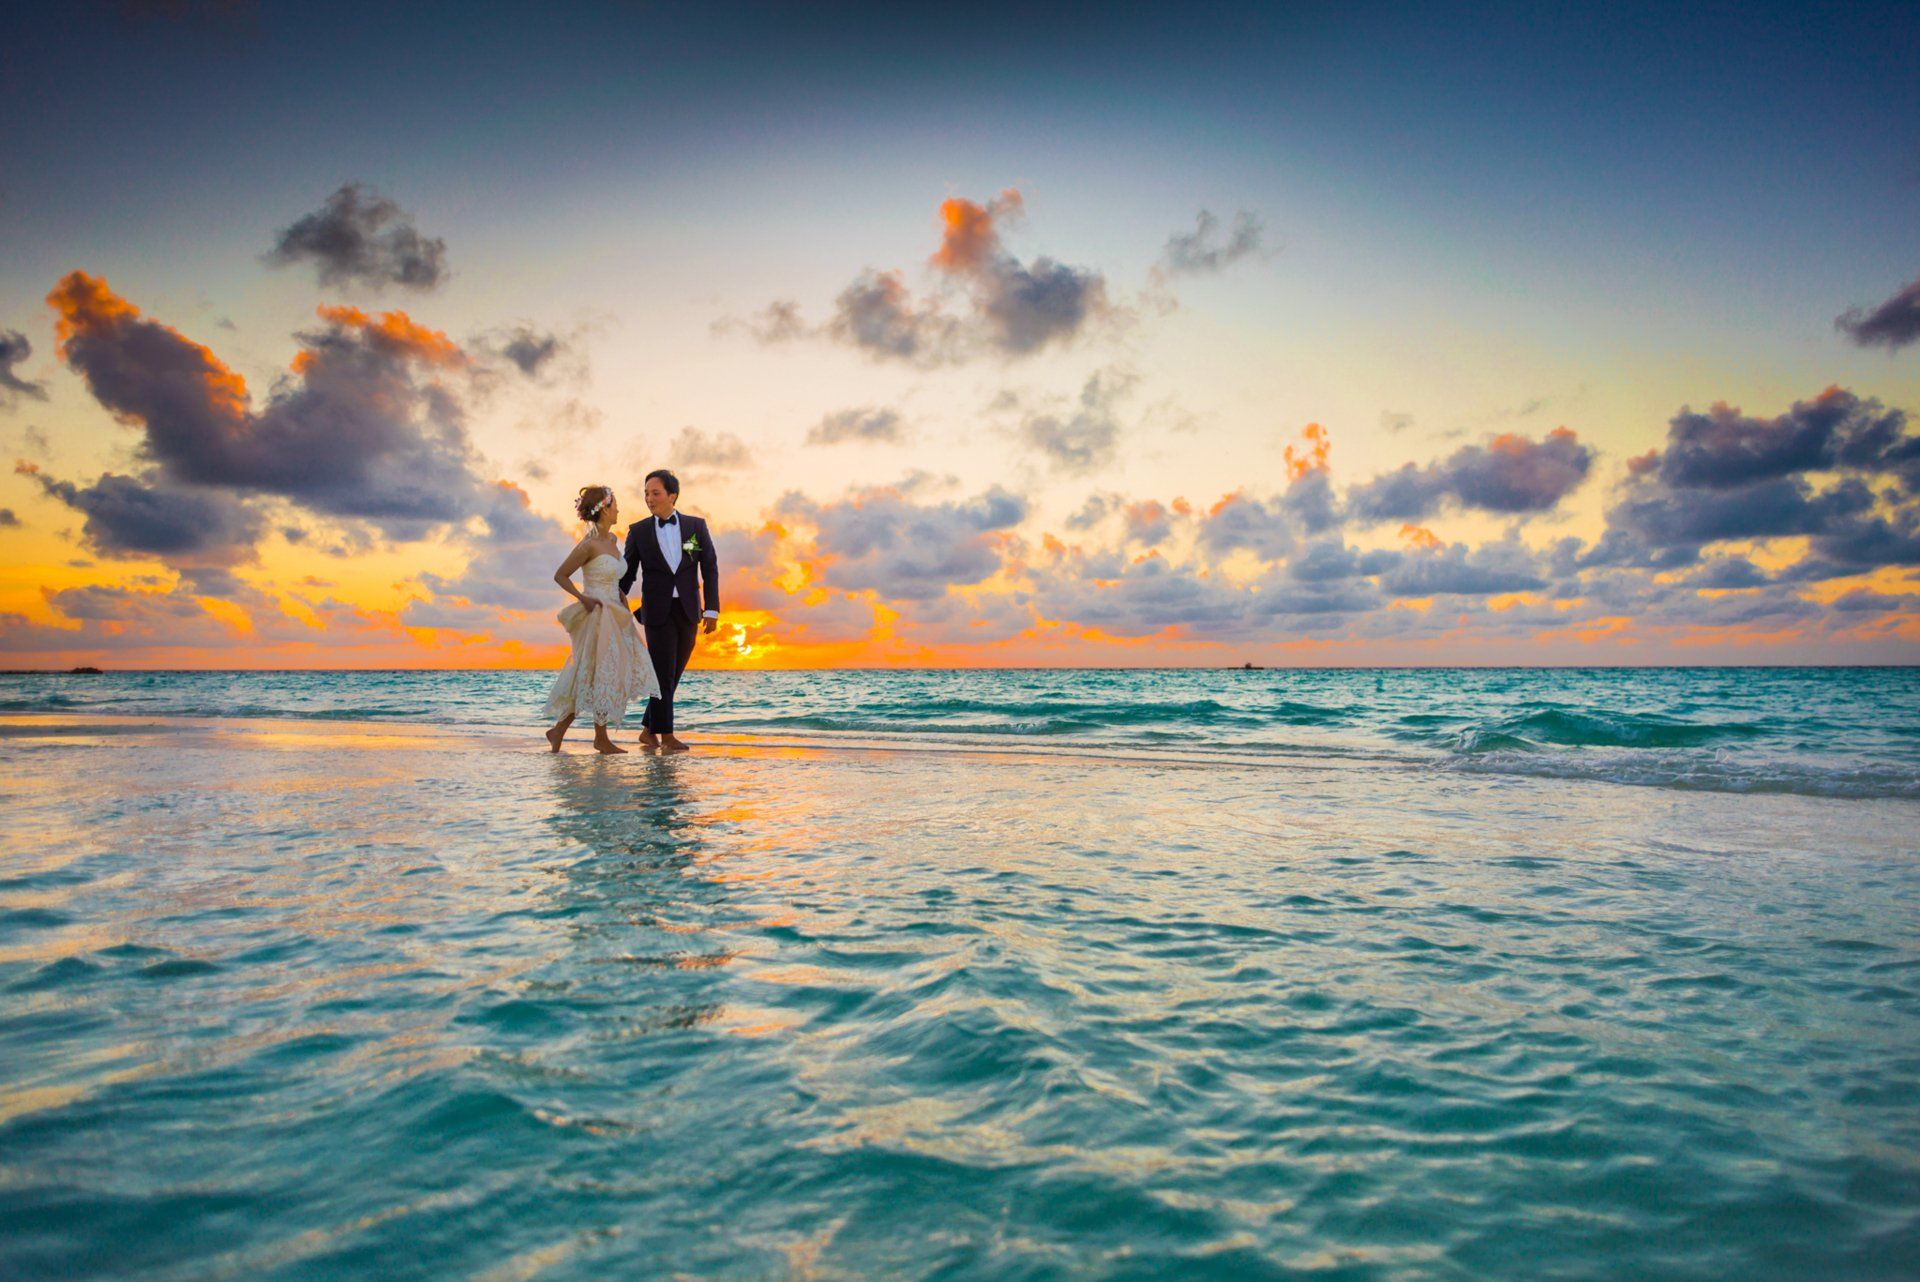 A bride and groom standing in the ocean at sunset during their destination wedding
